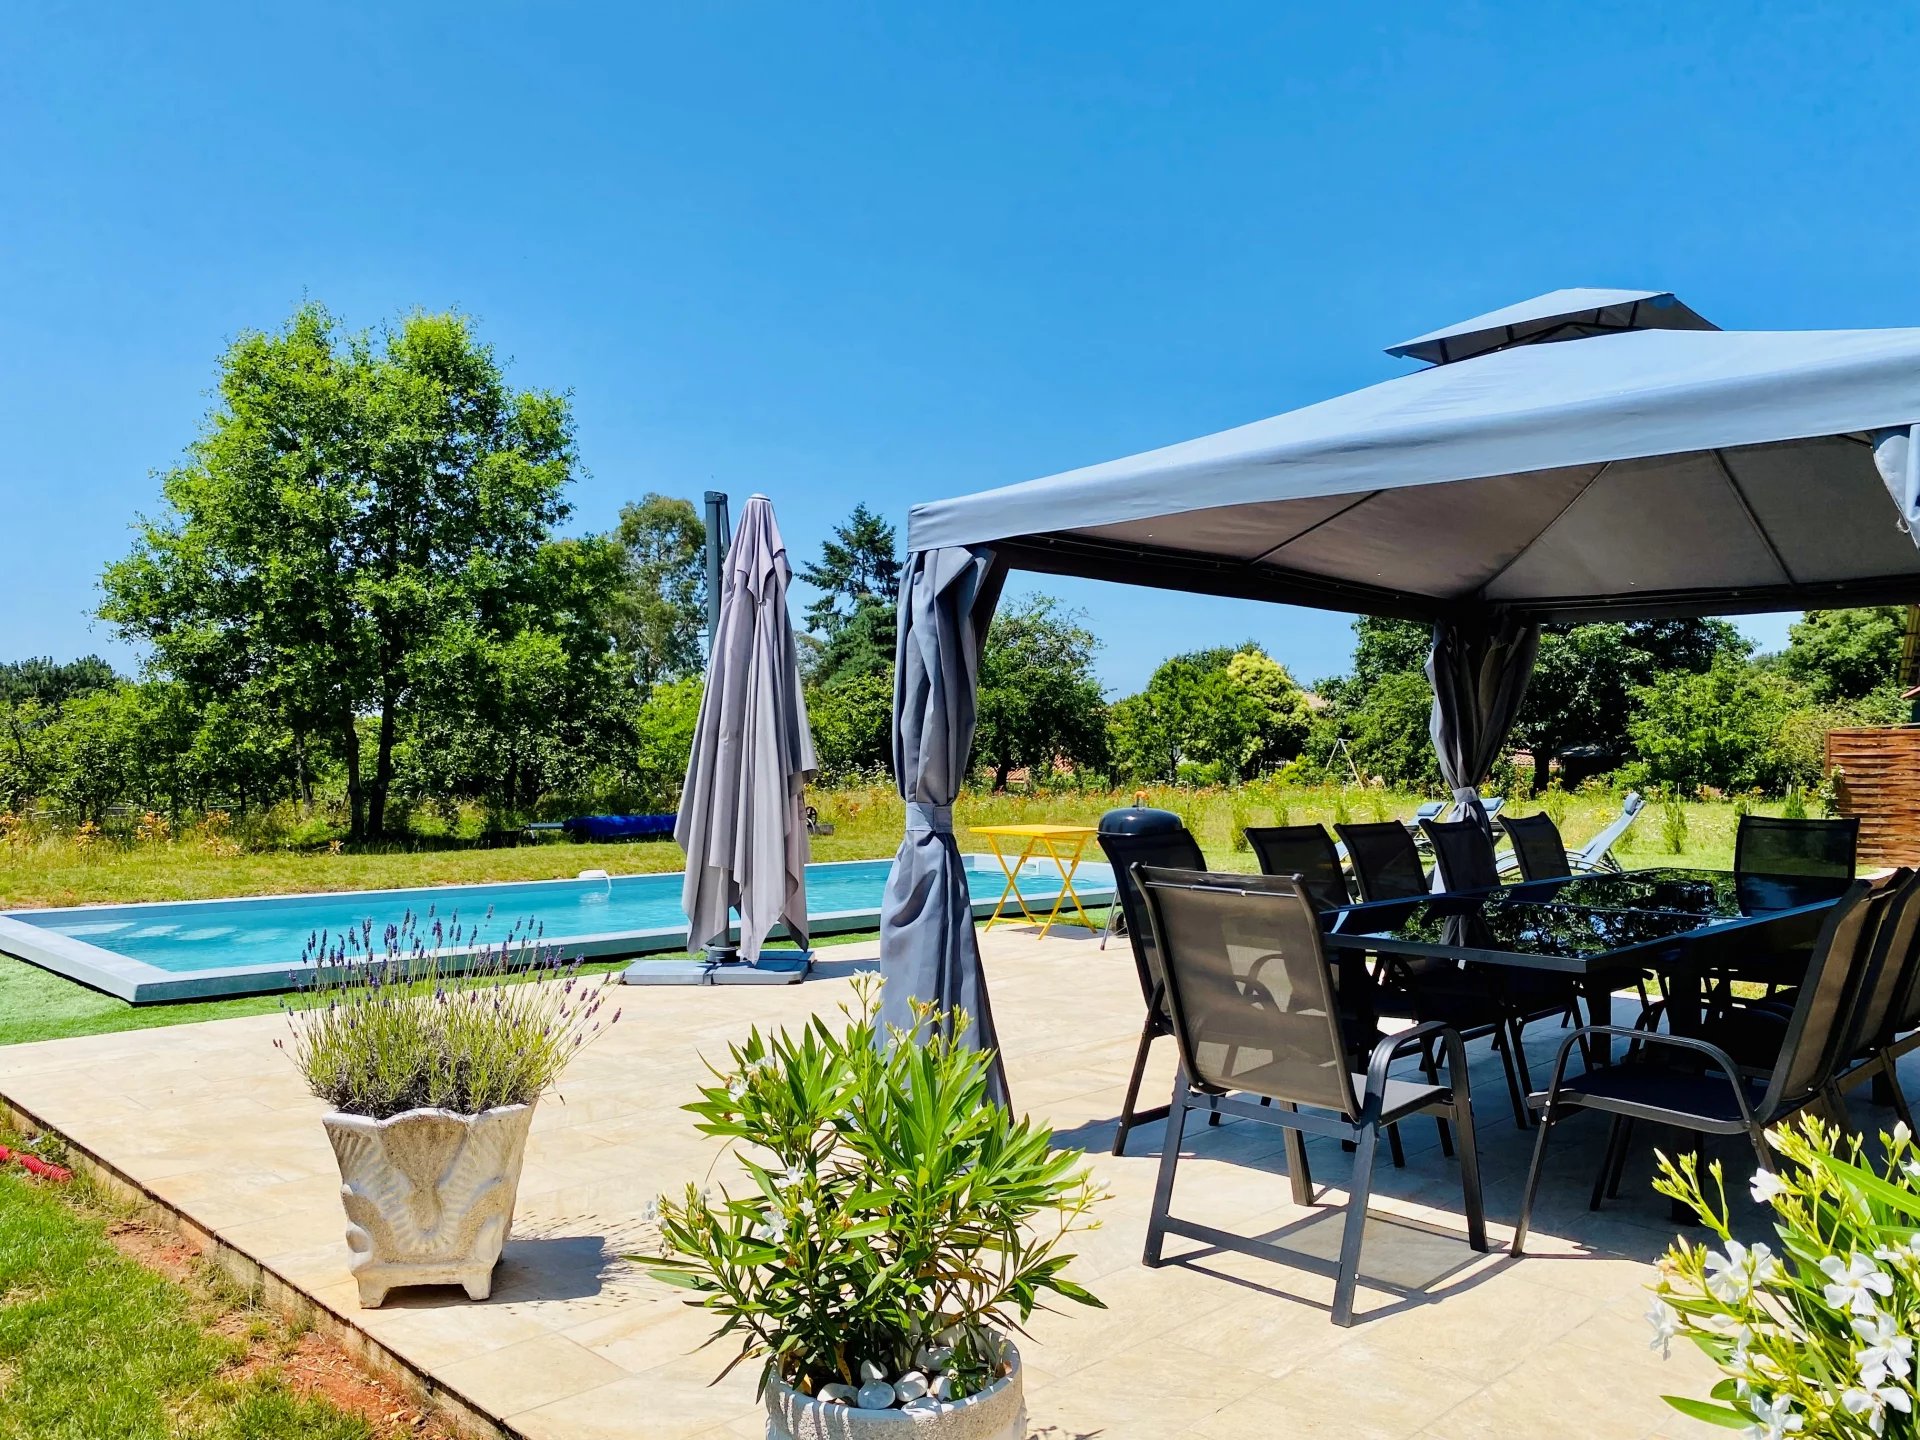 Complex of 3 Houses and Two Heated Pools - 5 minutes from Monpazier, Dordogne